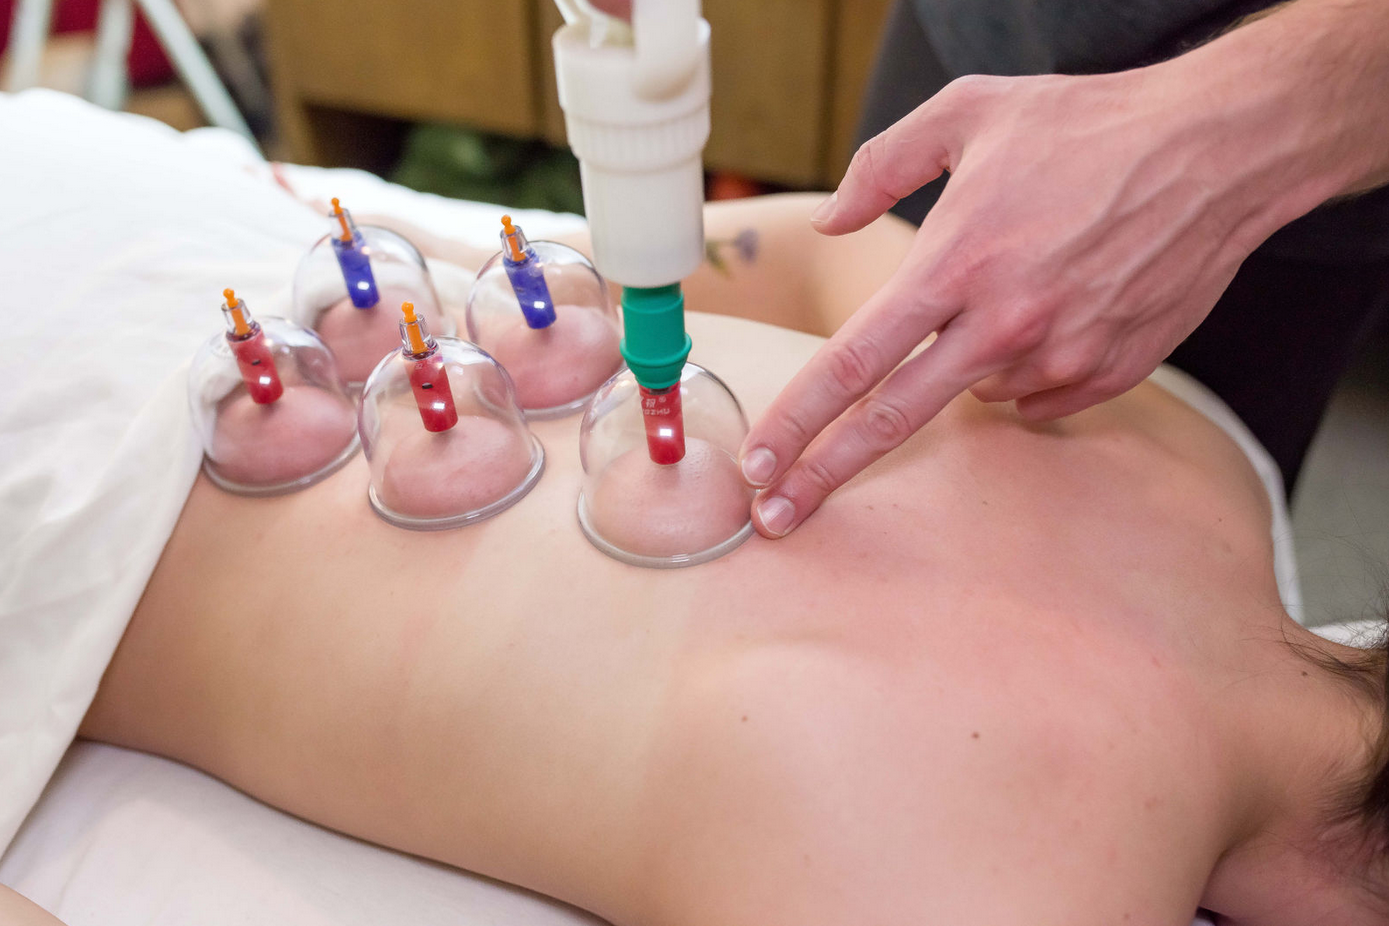 Cupping therapy during a massage or Thai bodywork at Na'masaje in Boise or Caldwell.